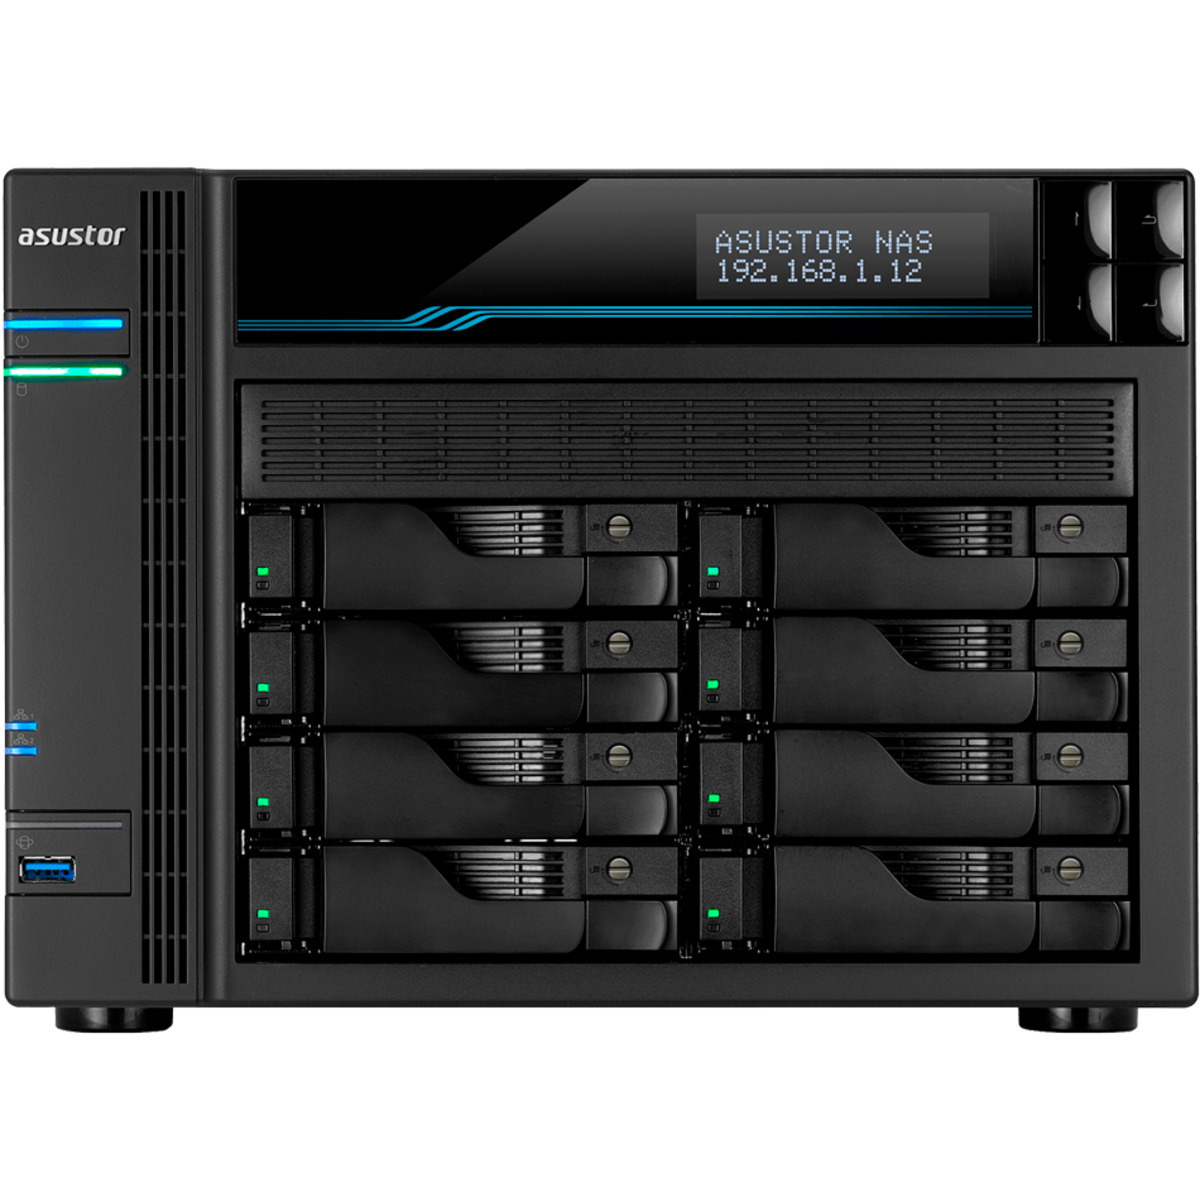 ASUSTOR AS6508T Lockerstor 8 64tb 8-Bay Desktop Multimedia / Power User / Business NAS - Network Attached Storage Device 8x8tb Seagate EXOS 7E10 ST8000NM017B 3.5 7200rpm SATA 6Gb/s HDD ENTERPRISE Class Drives Installed - Burn-In Tested - ON SALE - FREE RAM UPGRADE AS6508T Lockerstor 8